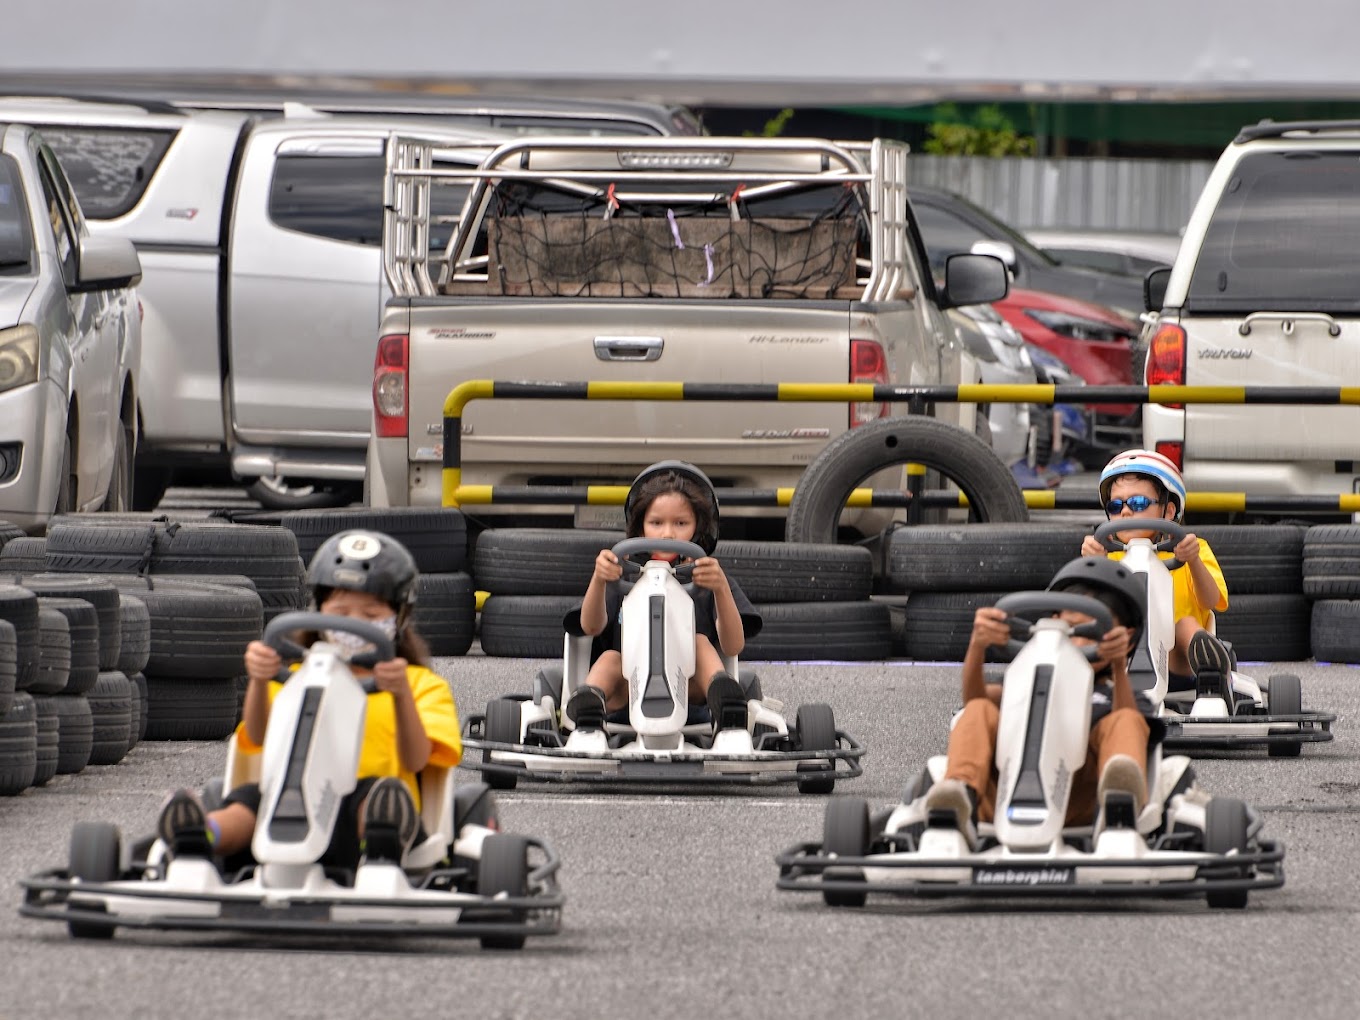 E-Go karting is a fun activity to do with kids in Bangkok